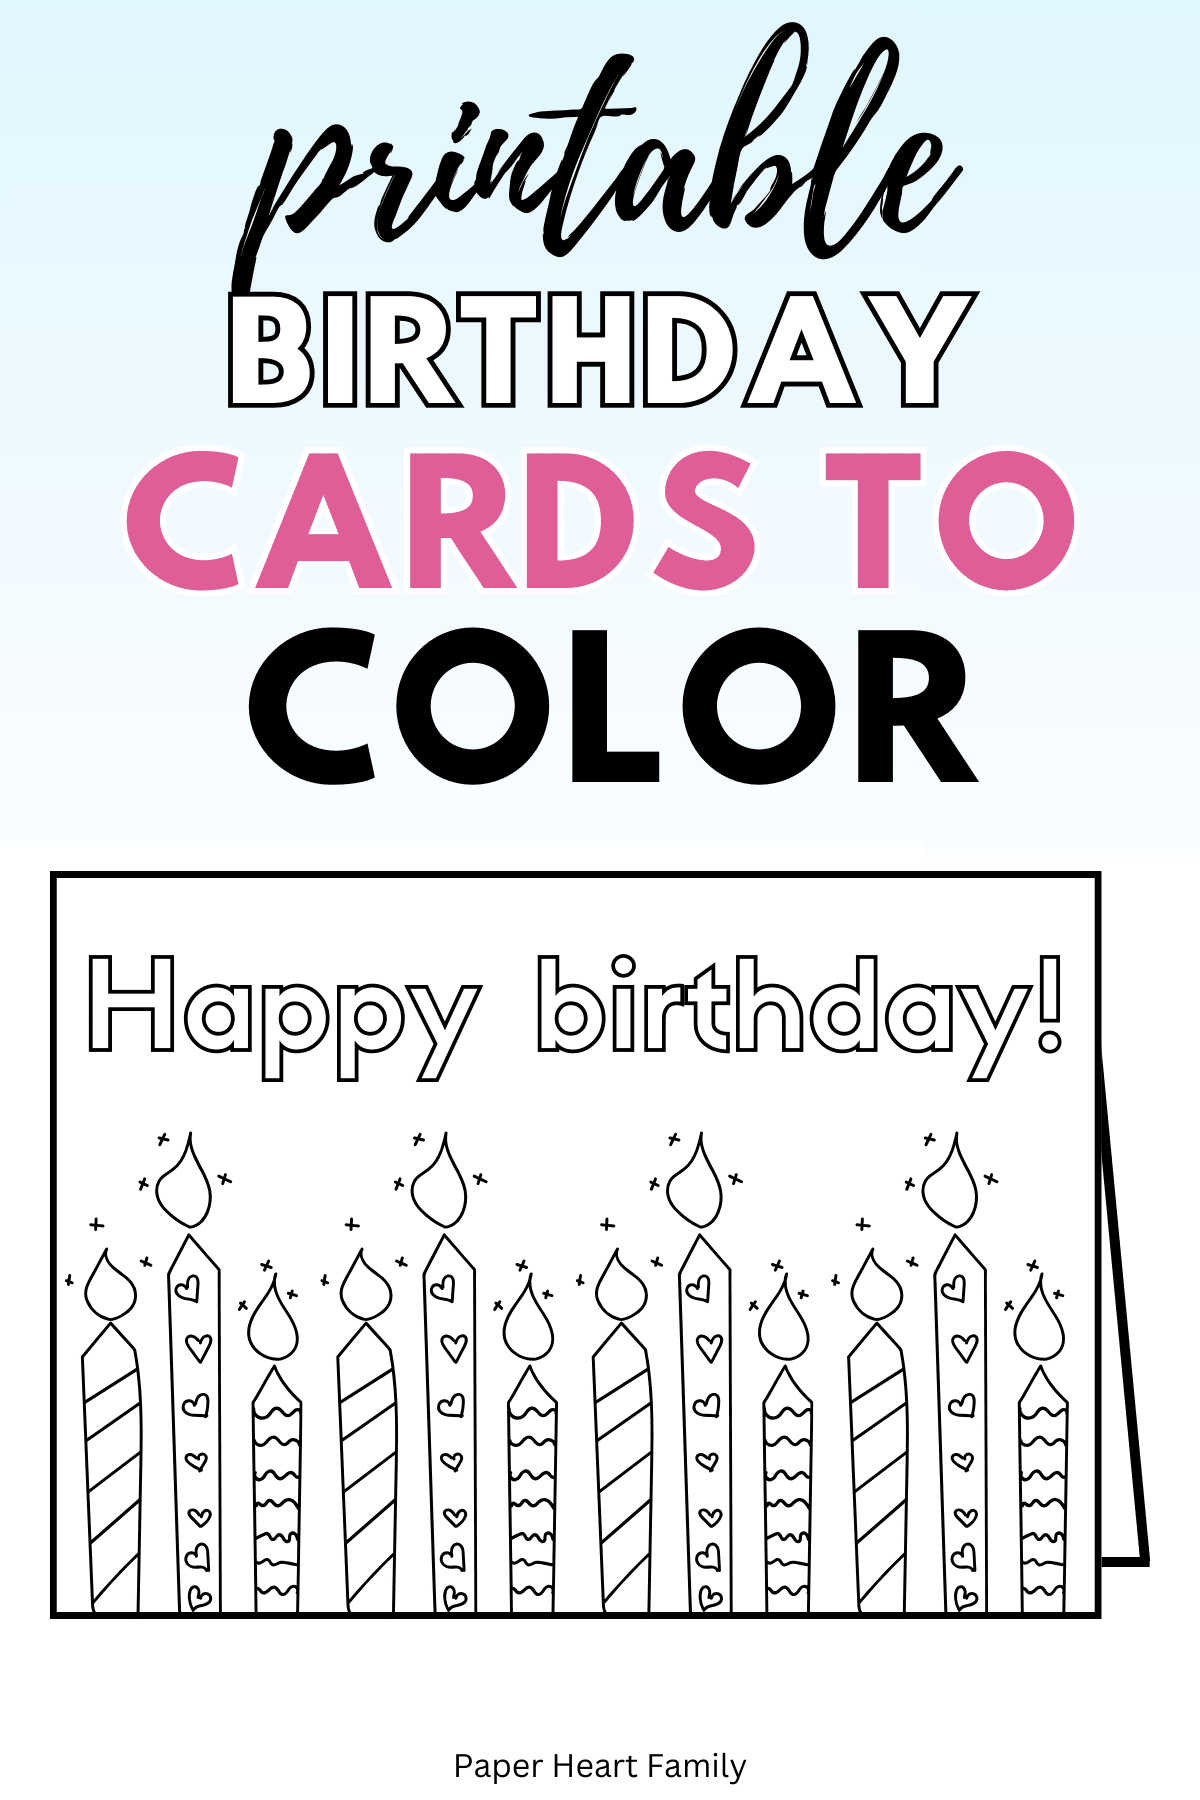 Happy birthday card with patterned candles to color